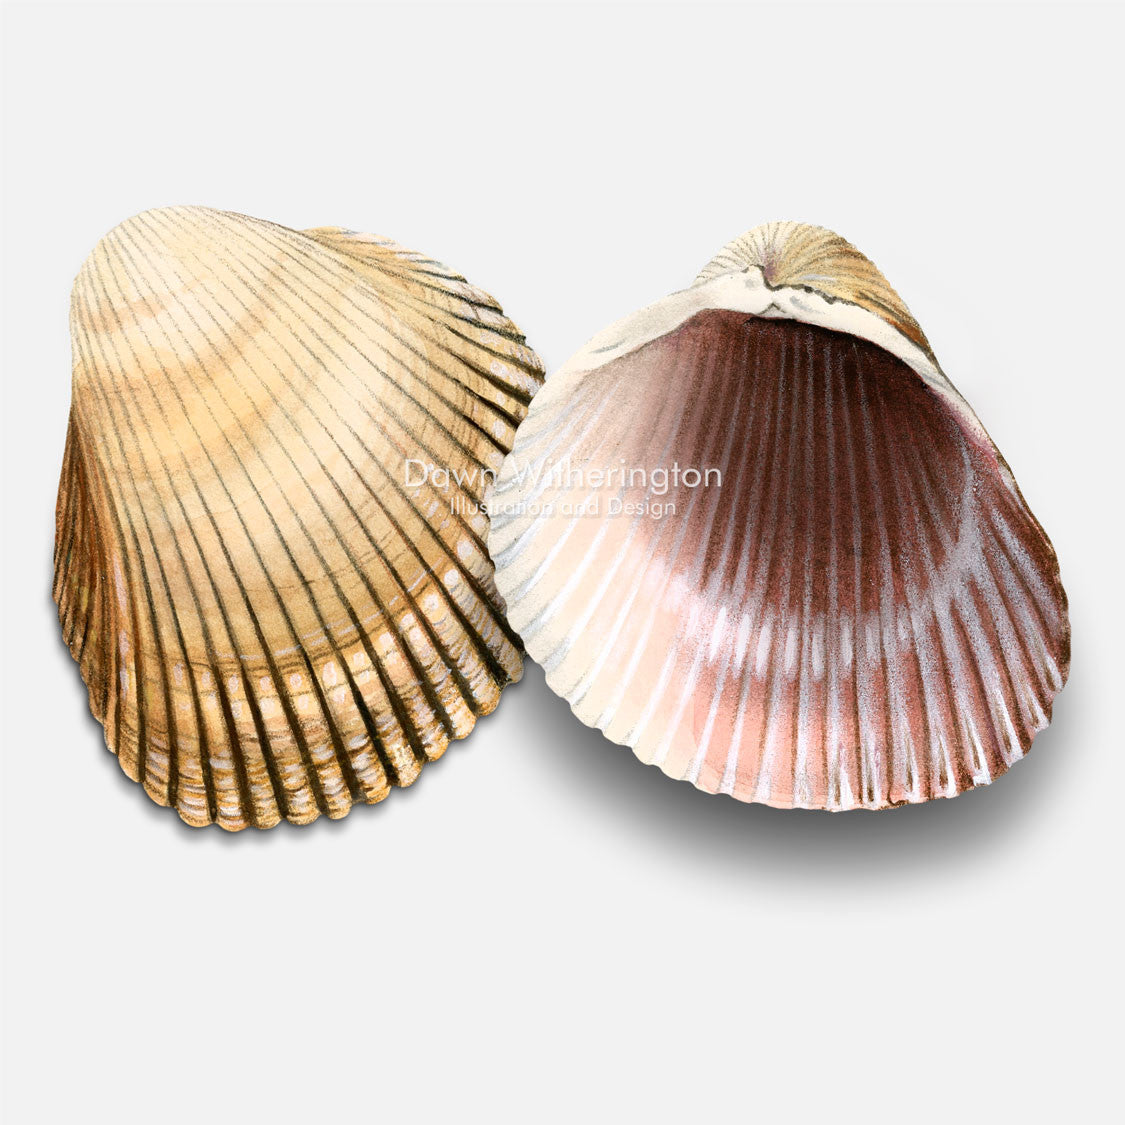 This beautiful drawing of Atlantic giant (heart) cockle shells, Dinocardium robustum, is accurate in detail.